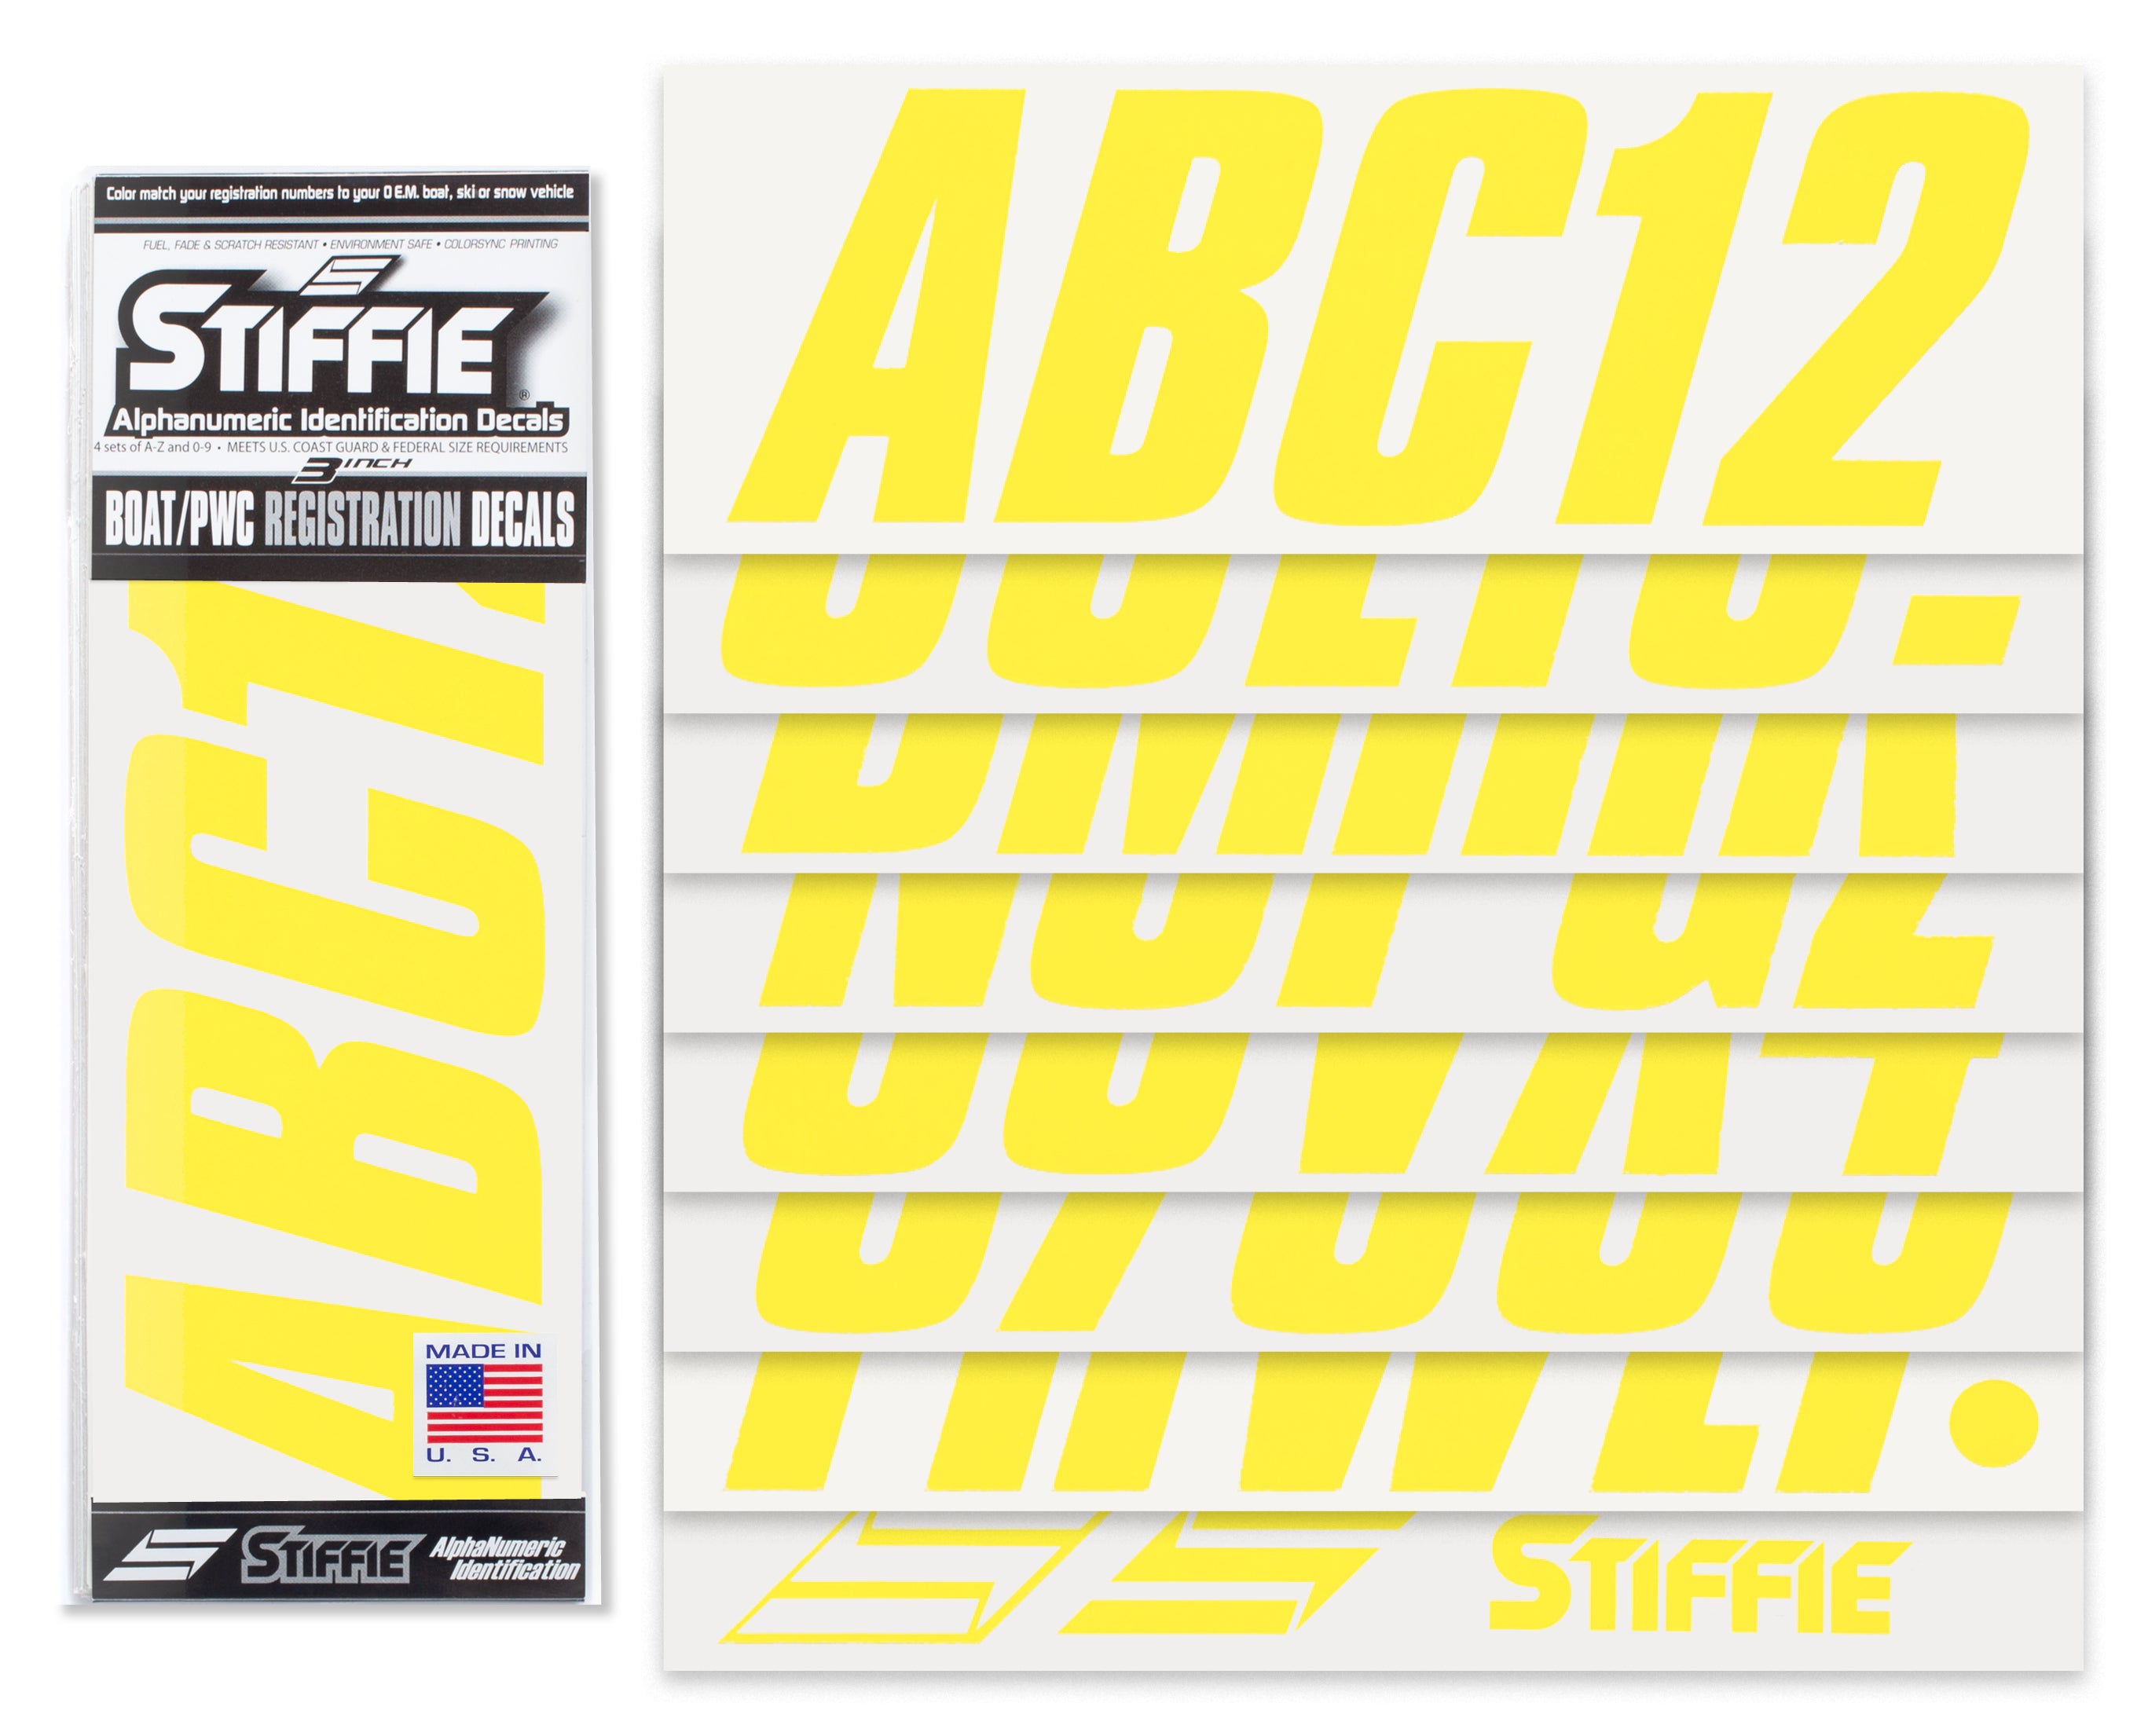 STIFFIE Shift Electric Yellow 3" ID Kit Alpha-Numeric Registration Identification Numbers Stickers Decals for Boats & Personal Watercraft